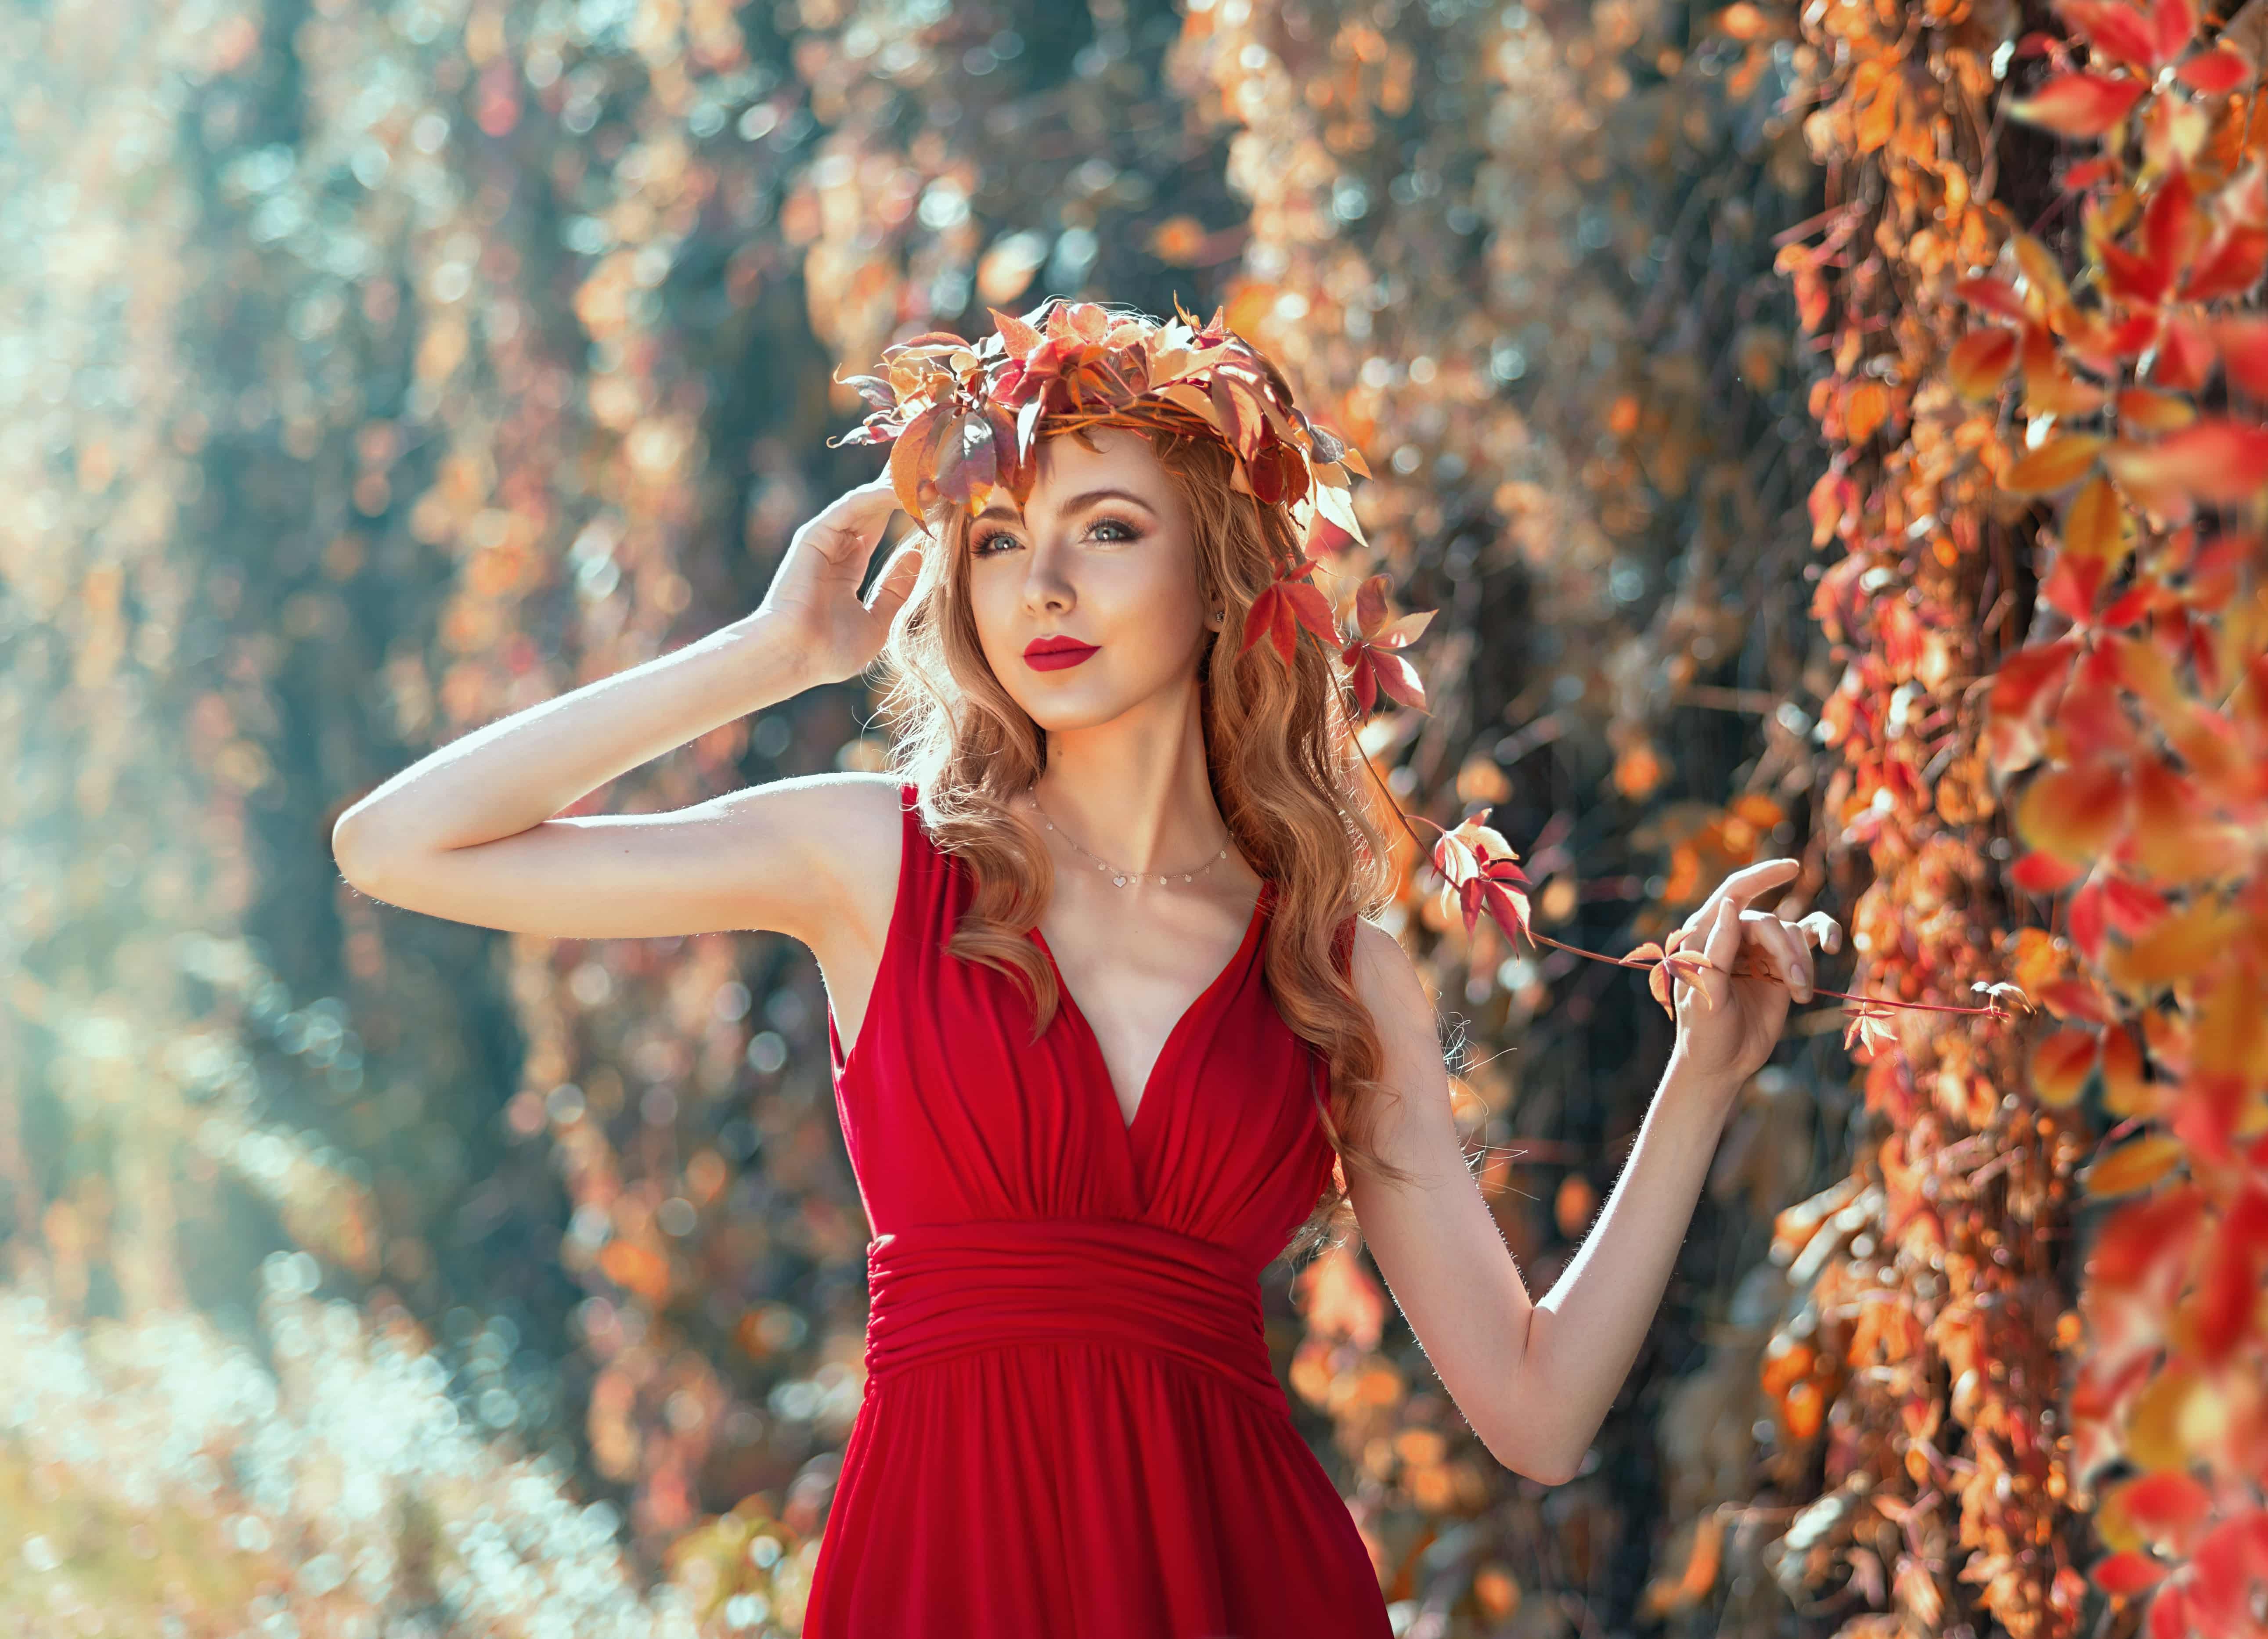 woman with curly red hair in a red dress a head wreath of flowers outdoor